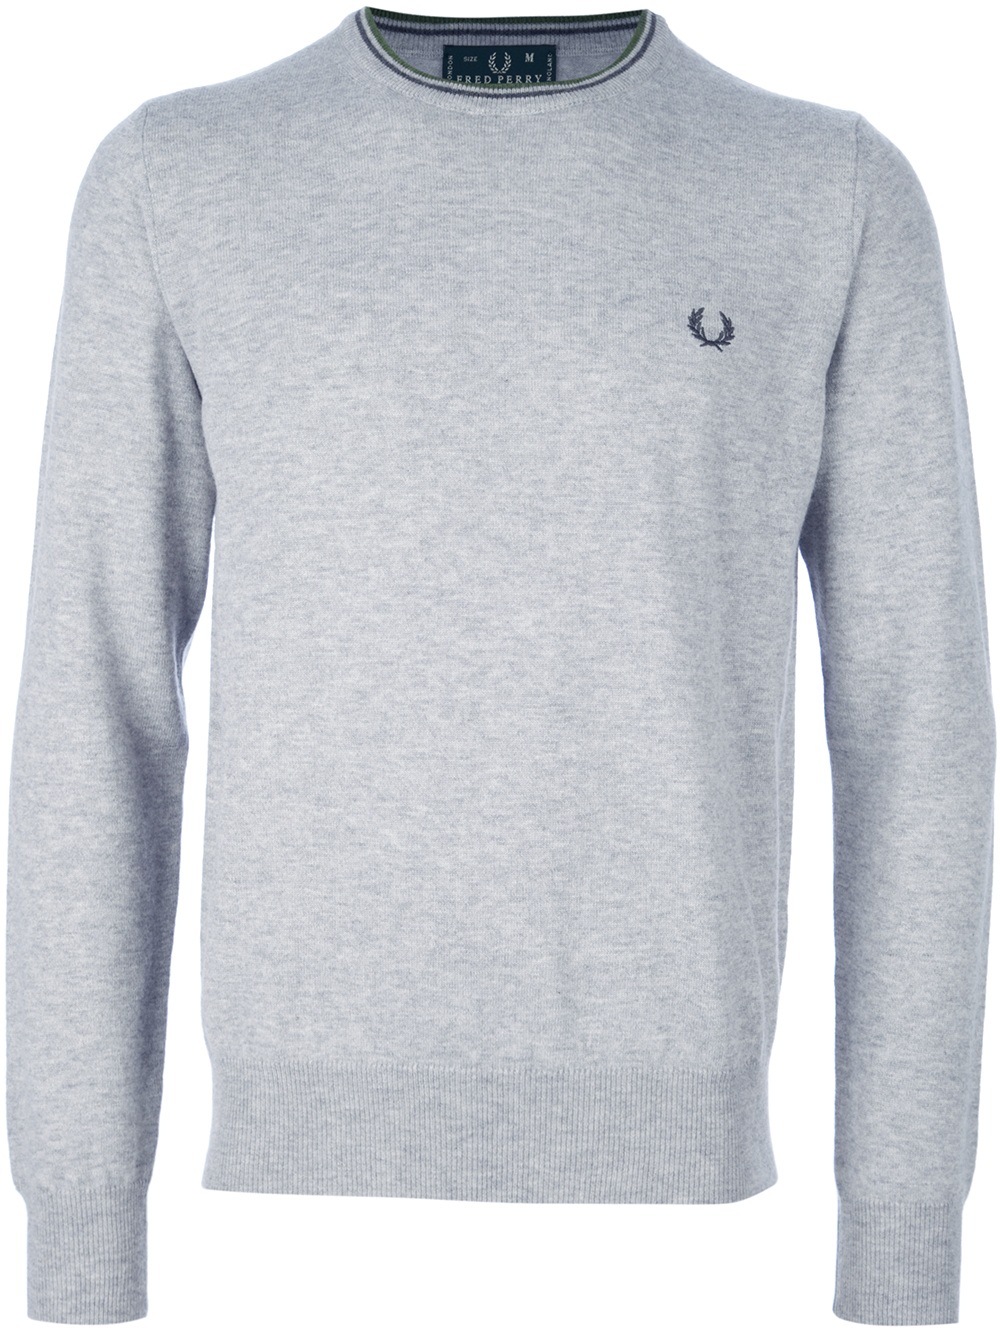 Fred Perry Crew Neck Sweater in Grey (Gray) for Men - Lyst